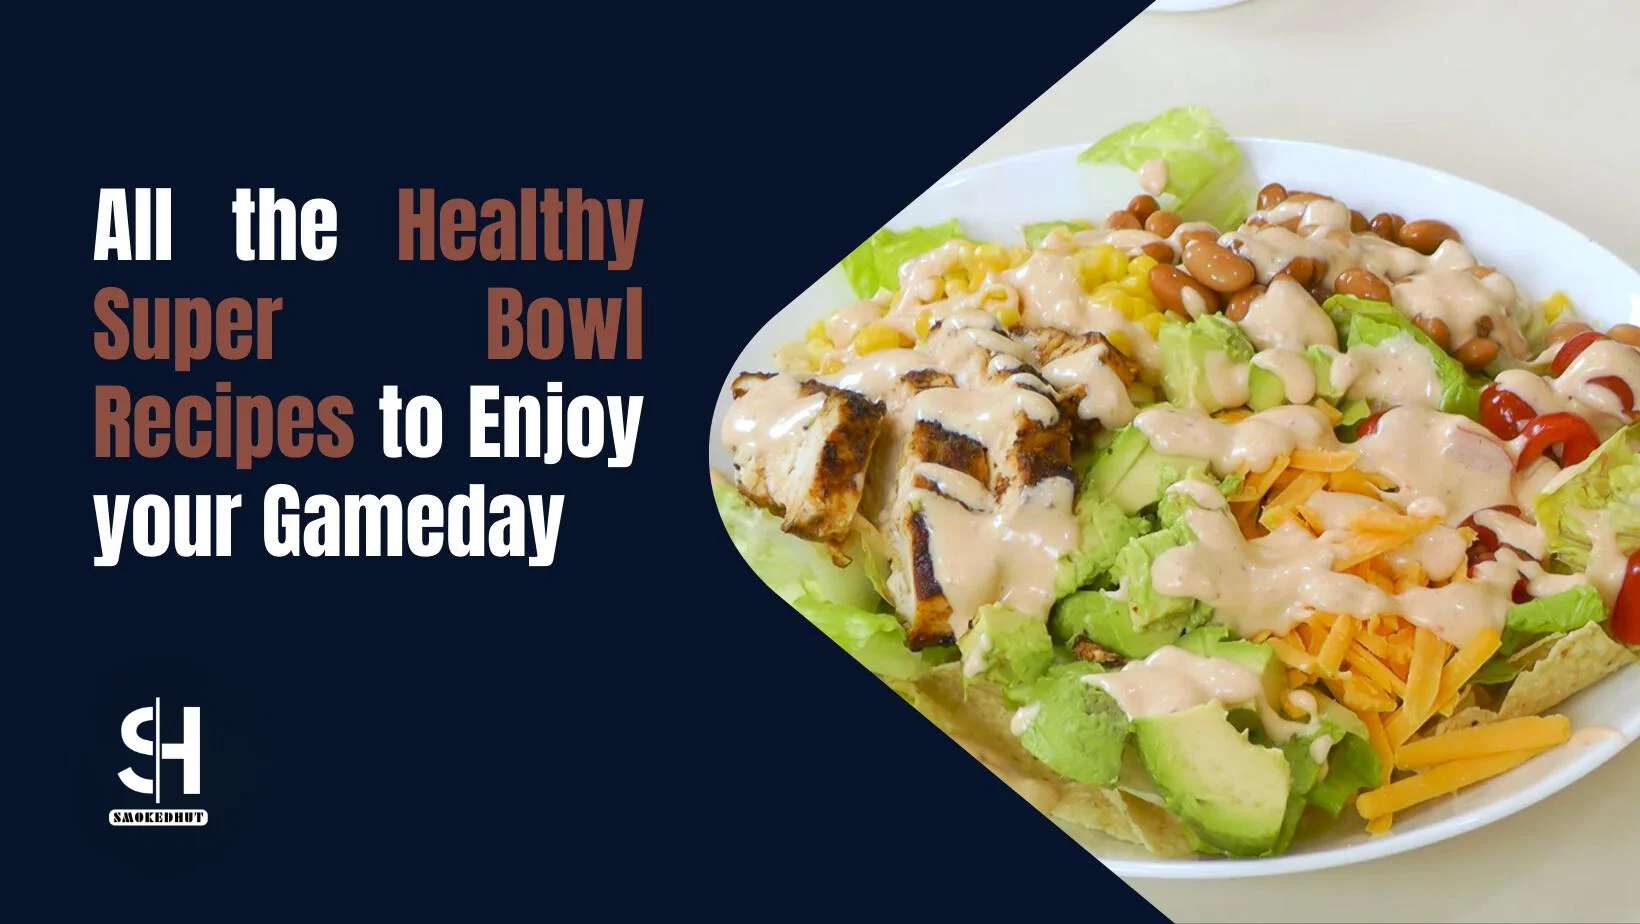 All the Healthy Super Bowl Recipes to Enjoy your Gameday